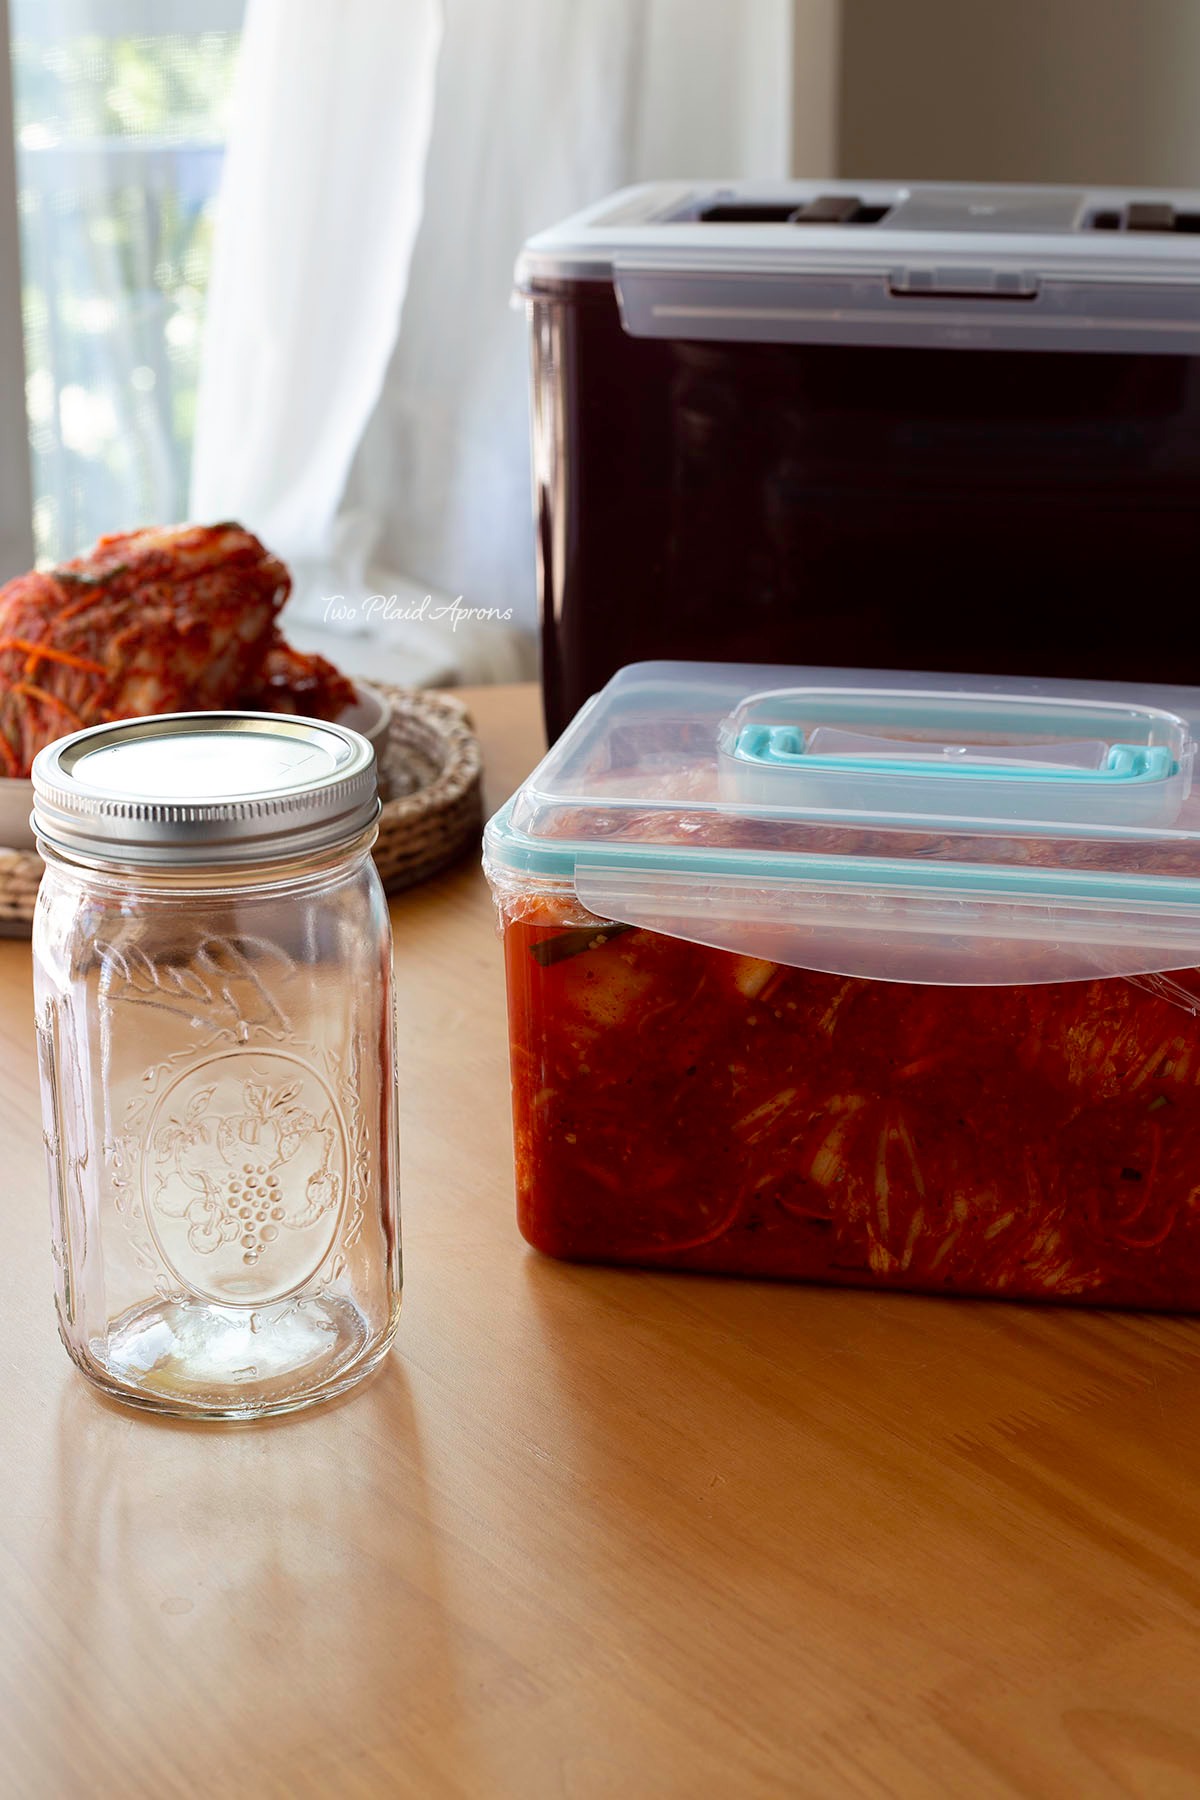 Containers for storing kimchi.